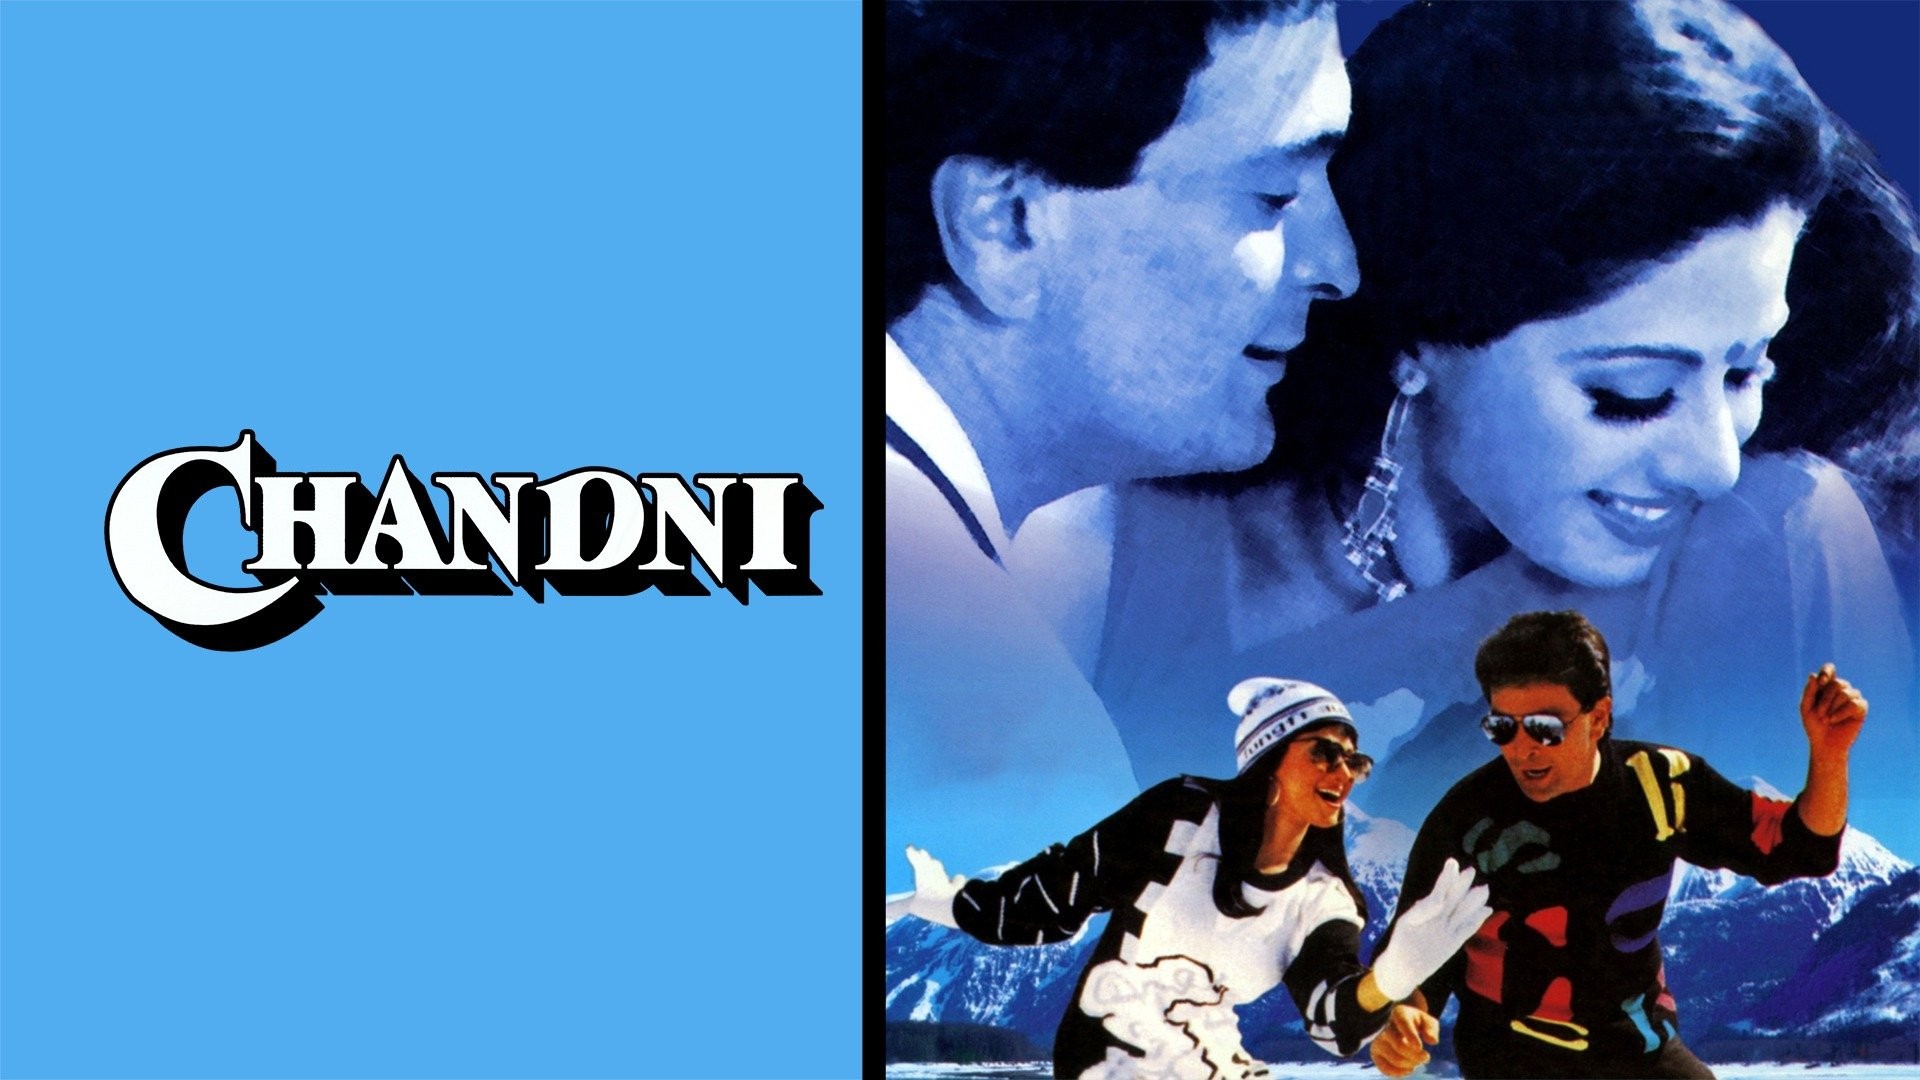 Chandni - Film Cast, Release Date, Chandni Full Movie Download, Online MP3  Songs, HD Trailer | Bollywood Life